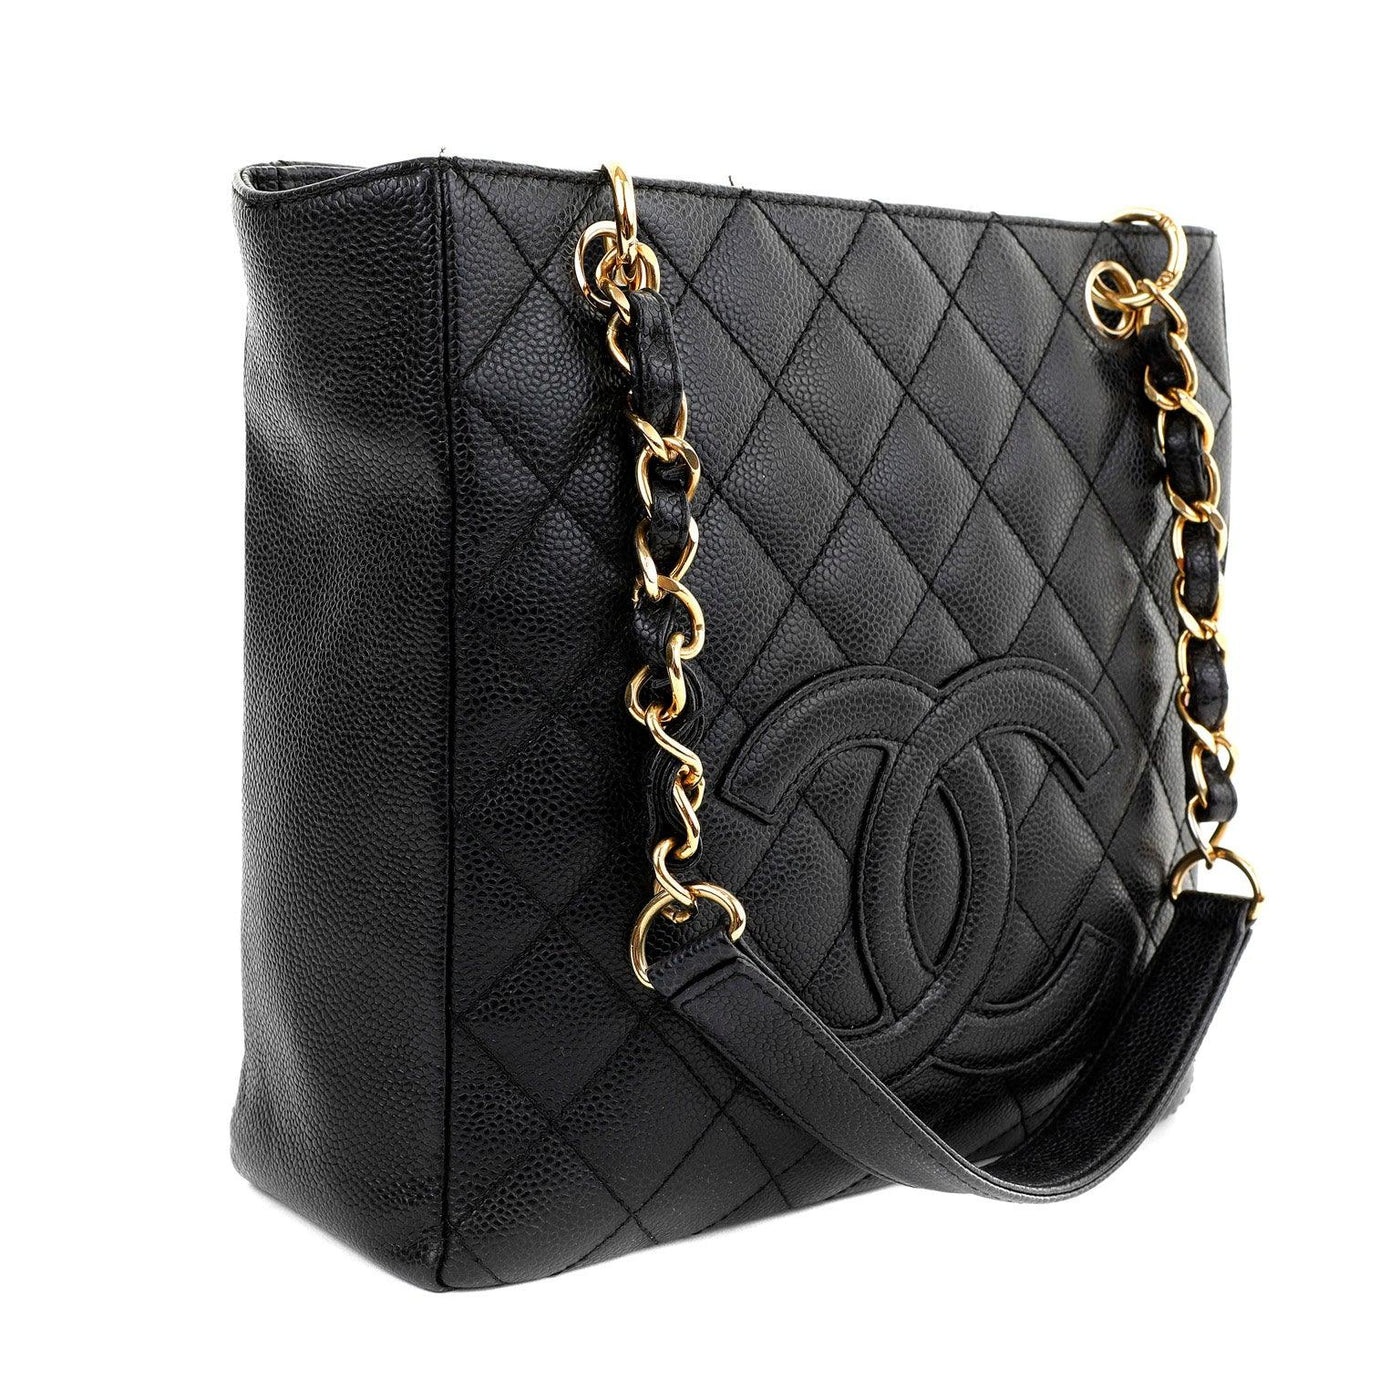 Chanel Black Caviar Petite Shopper Tote with Gold Hardware - Only Authentics